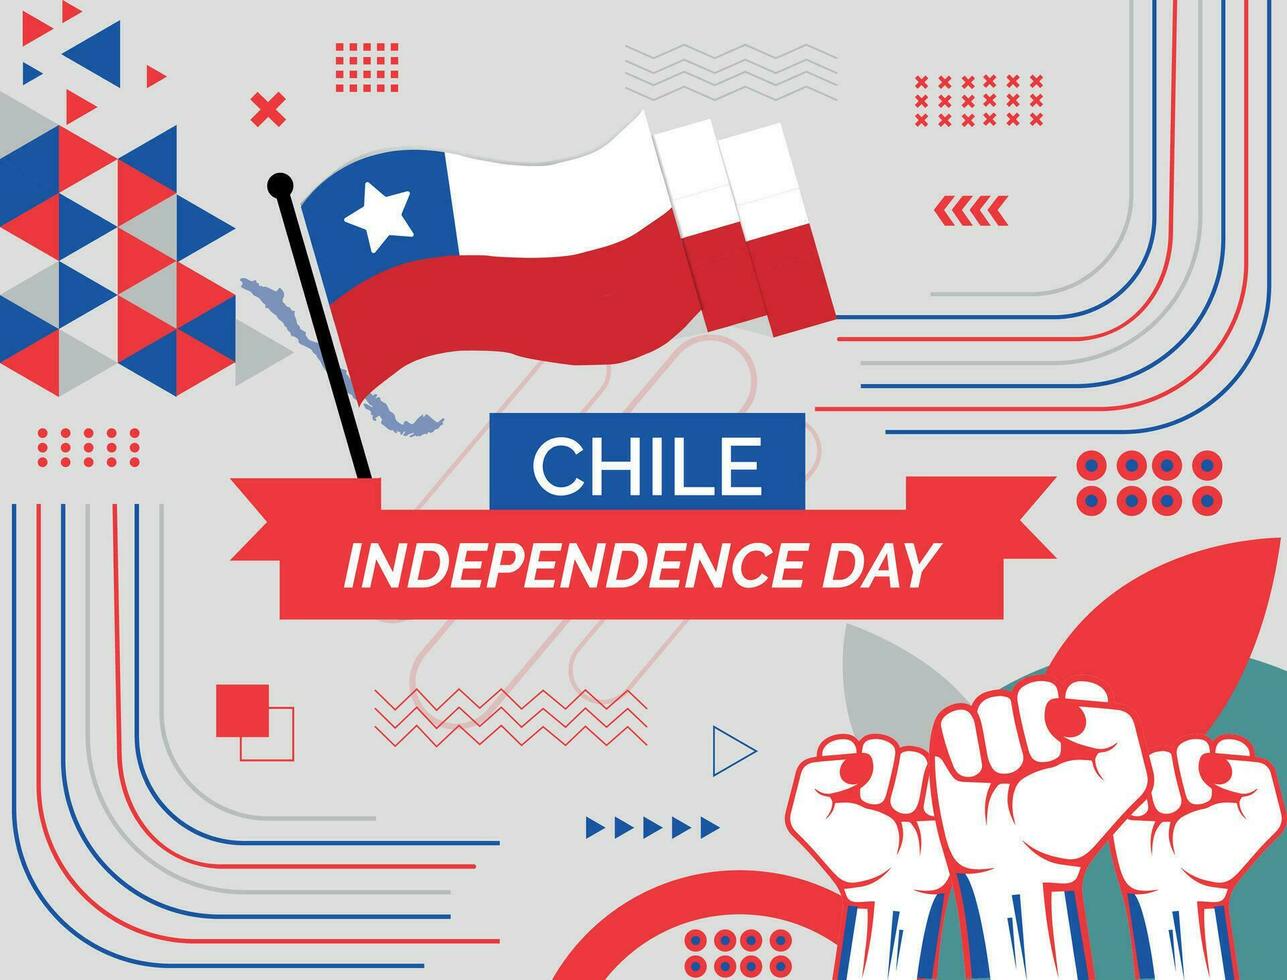 CHILE Map and raised fists. National day or Independence day design for CHILE celebration. Modern retro design with abstract icons. Vector illustration.